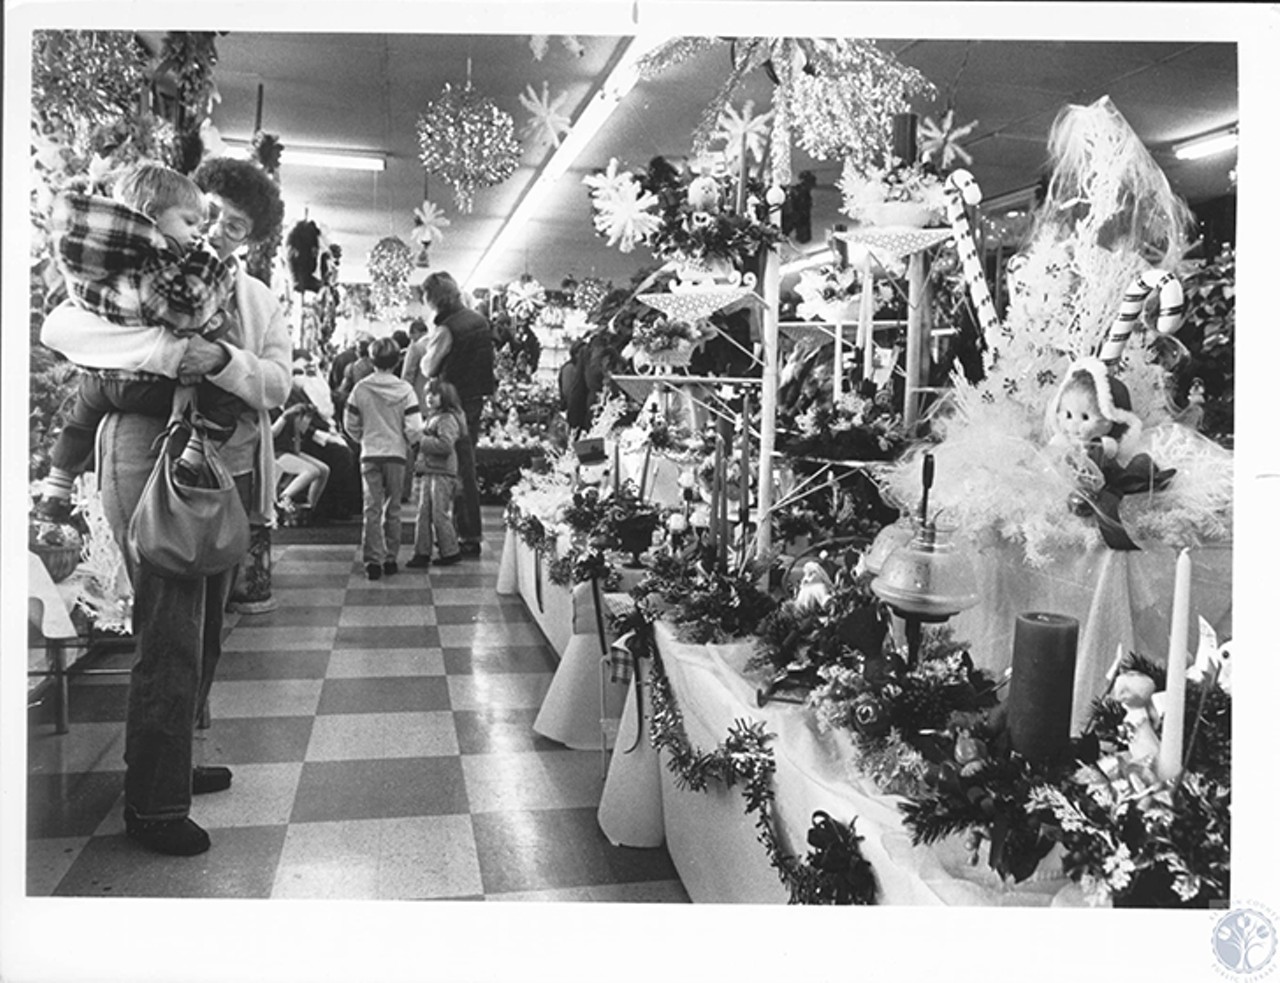 Covington, 1981
"Kathy Spauling and son David (2) looking at displays at Jackson Florist during open house"